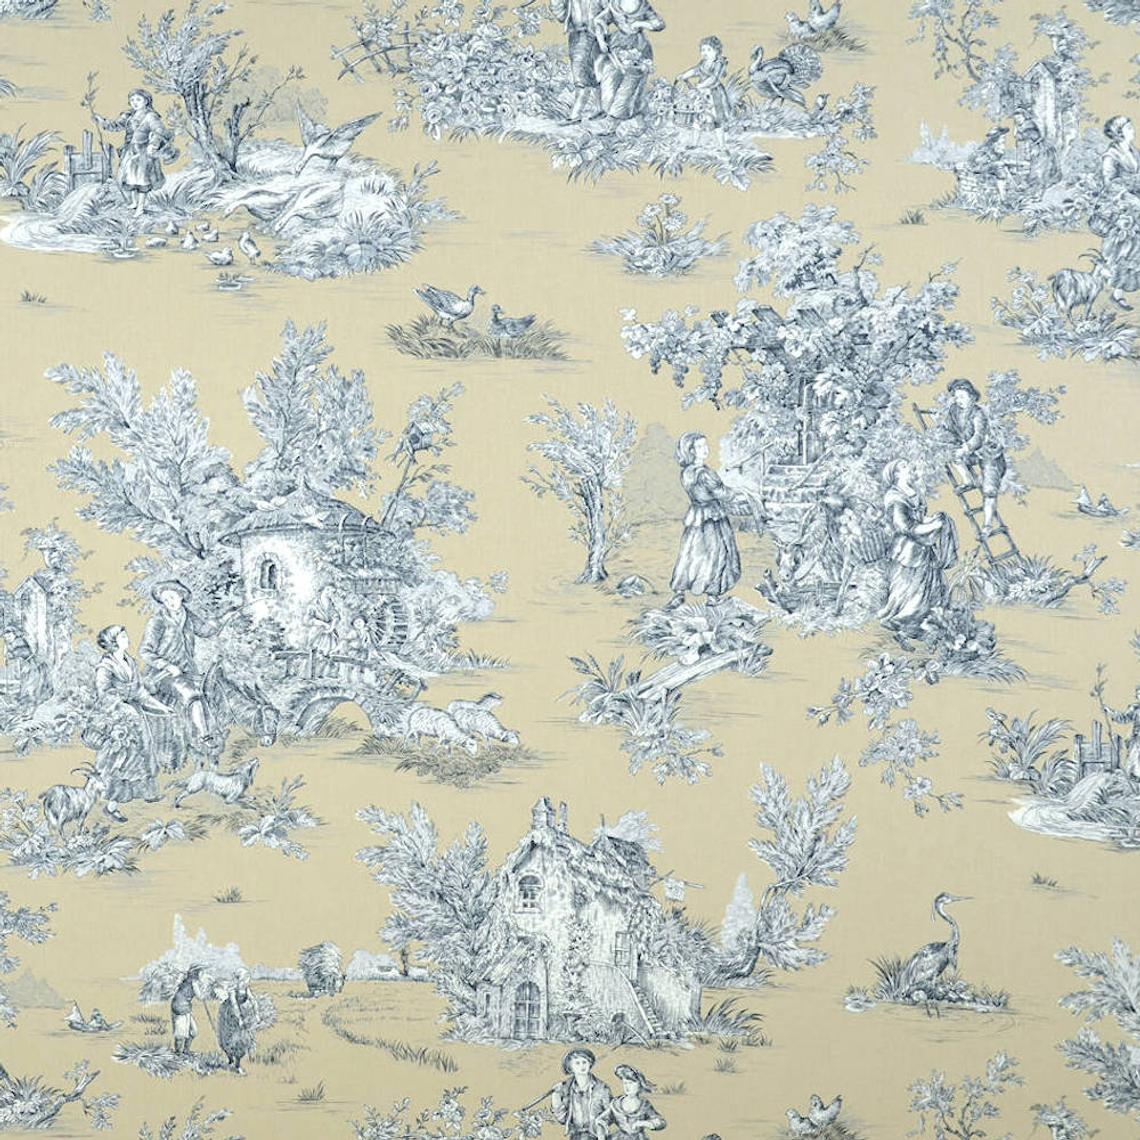 decorative pillows in pastorale #88 blue on beige french country toile